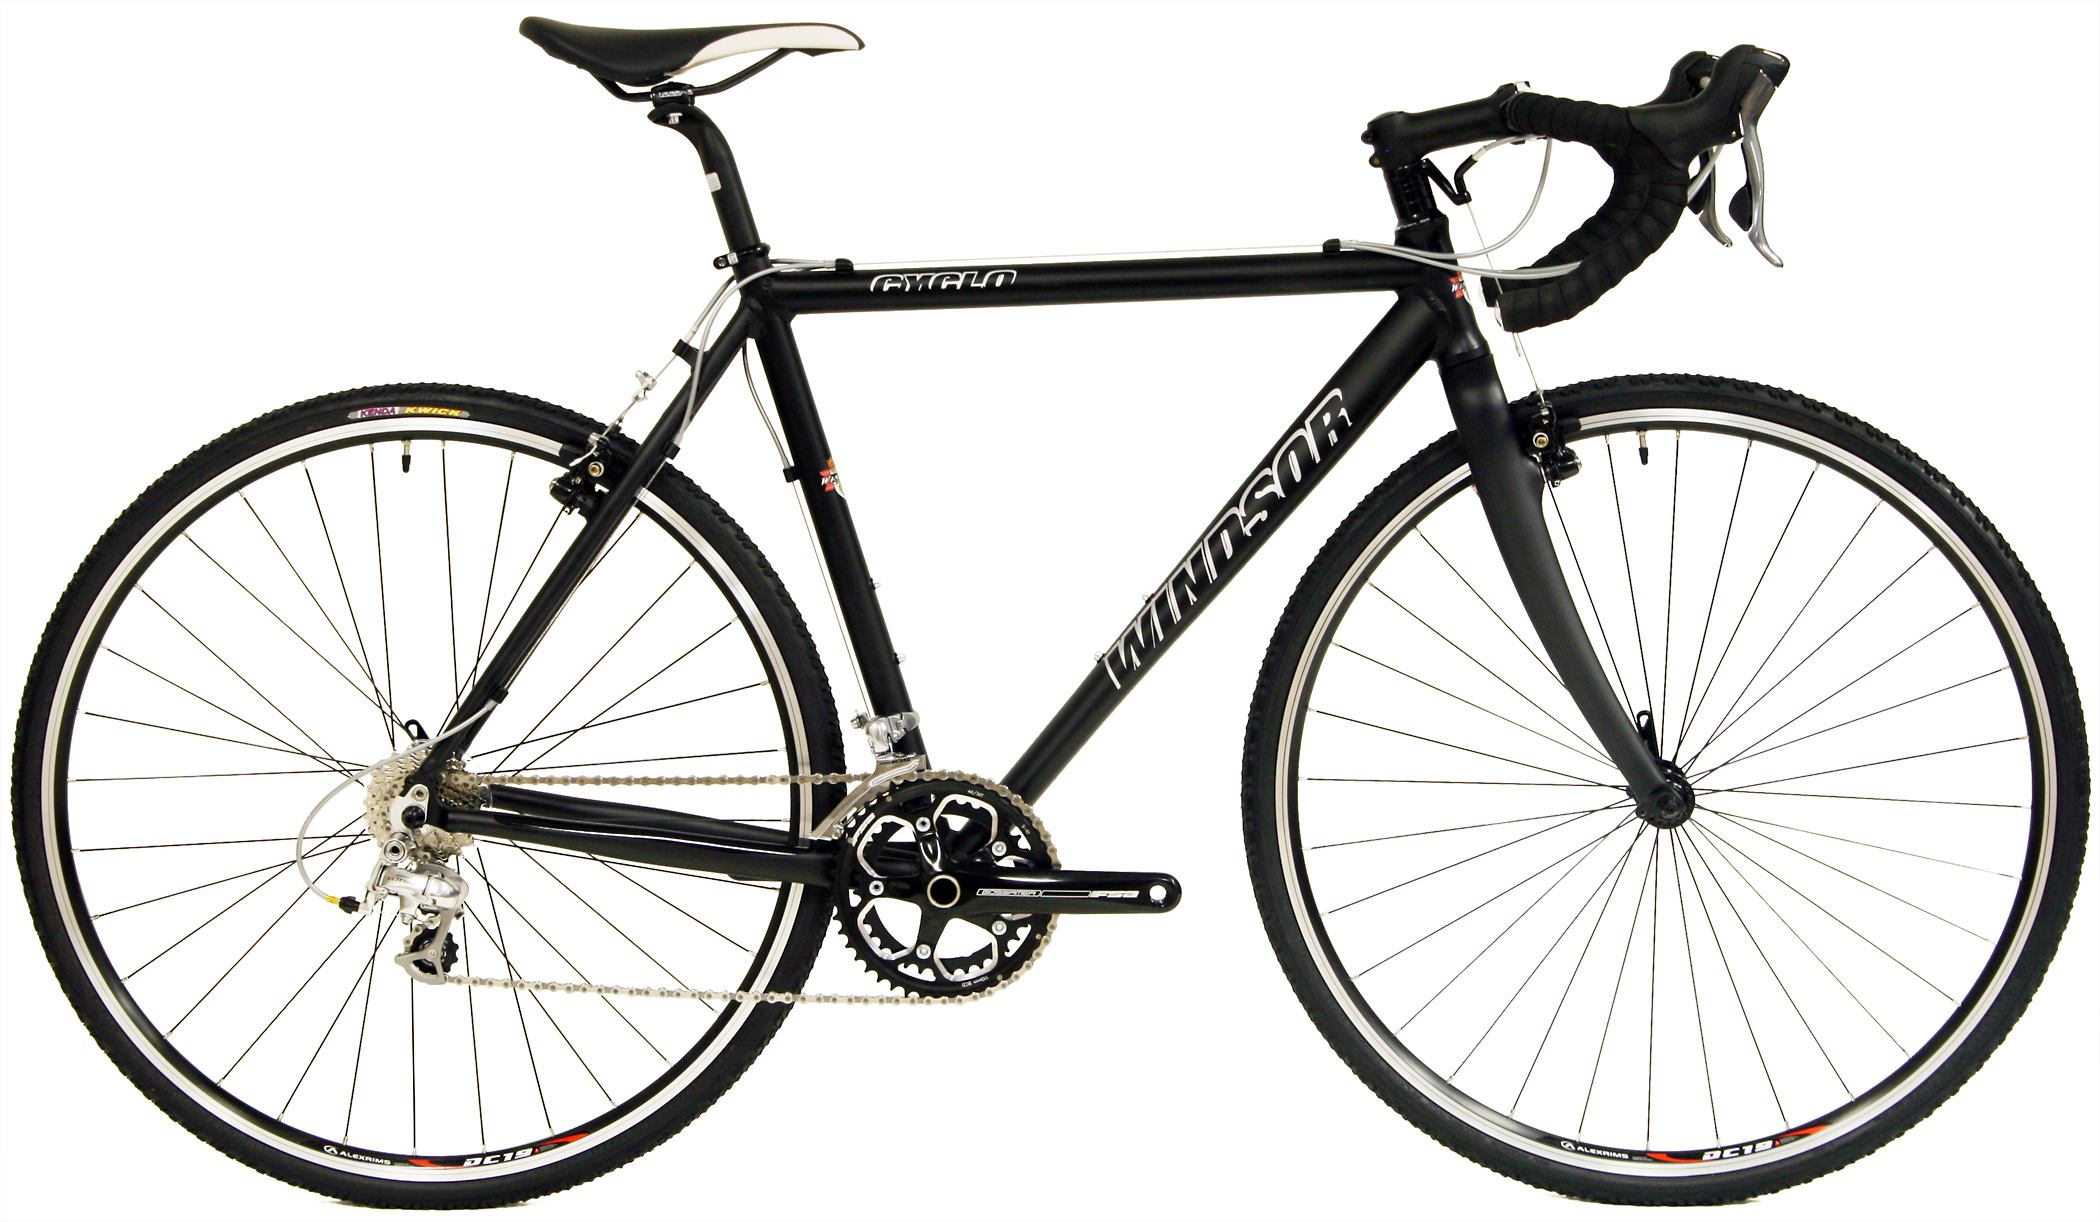 Save up to 60% off new Shimano equipped Cyclocross Road Bikes ...